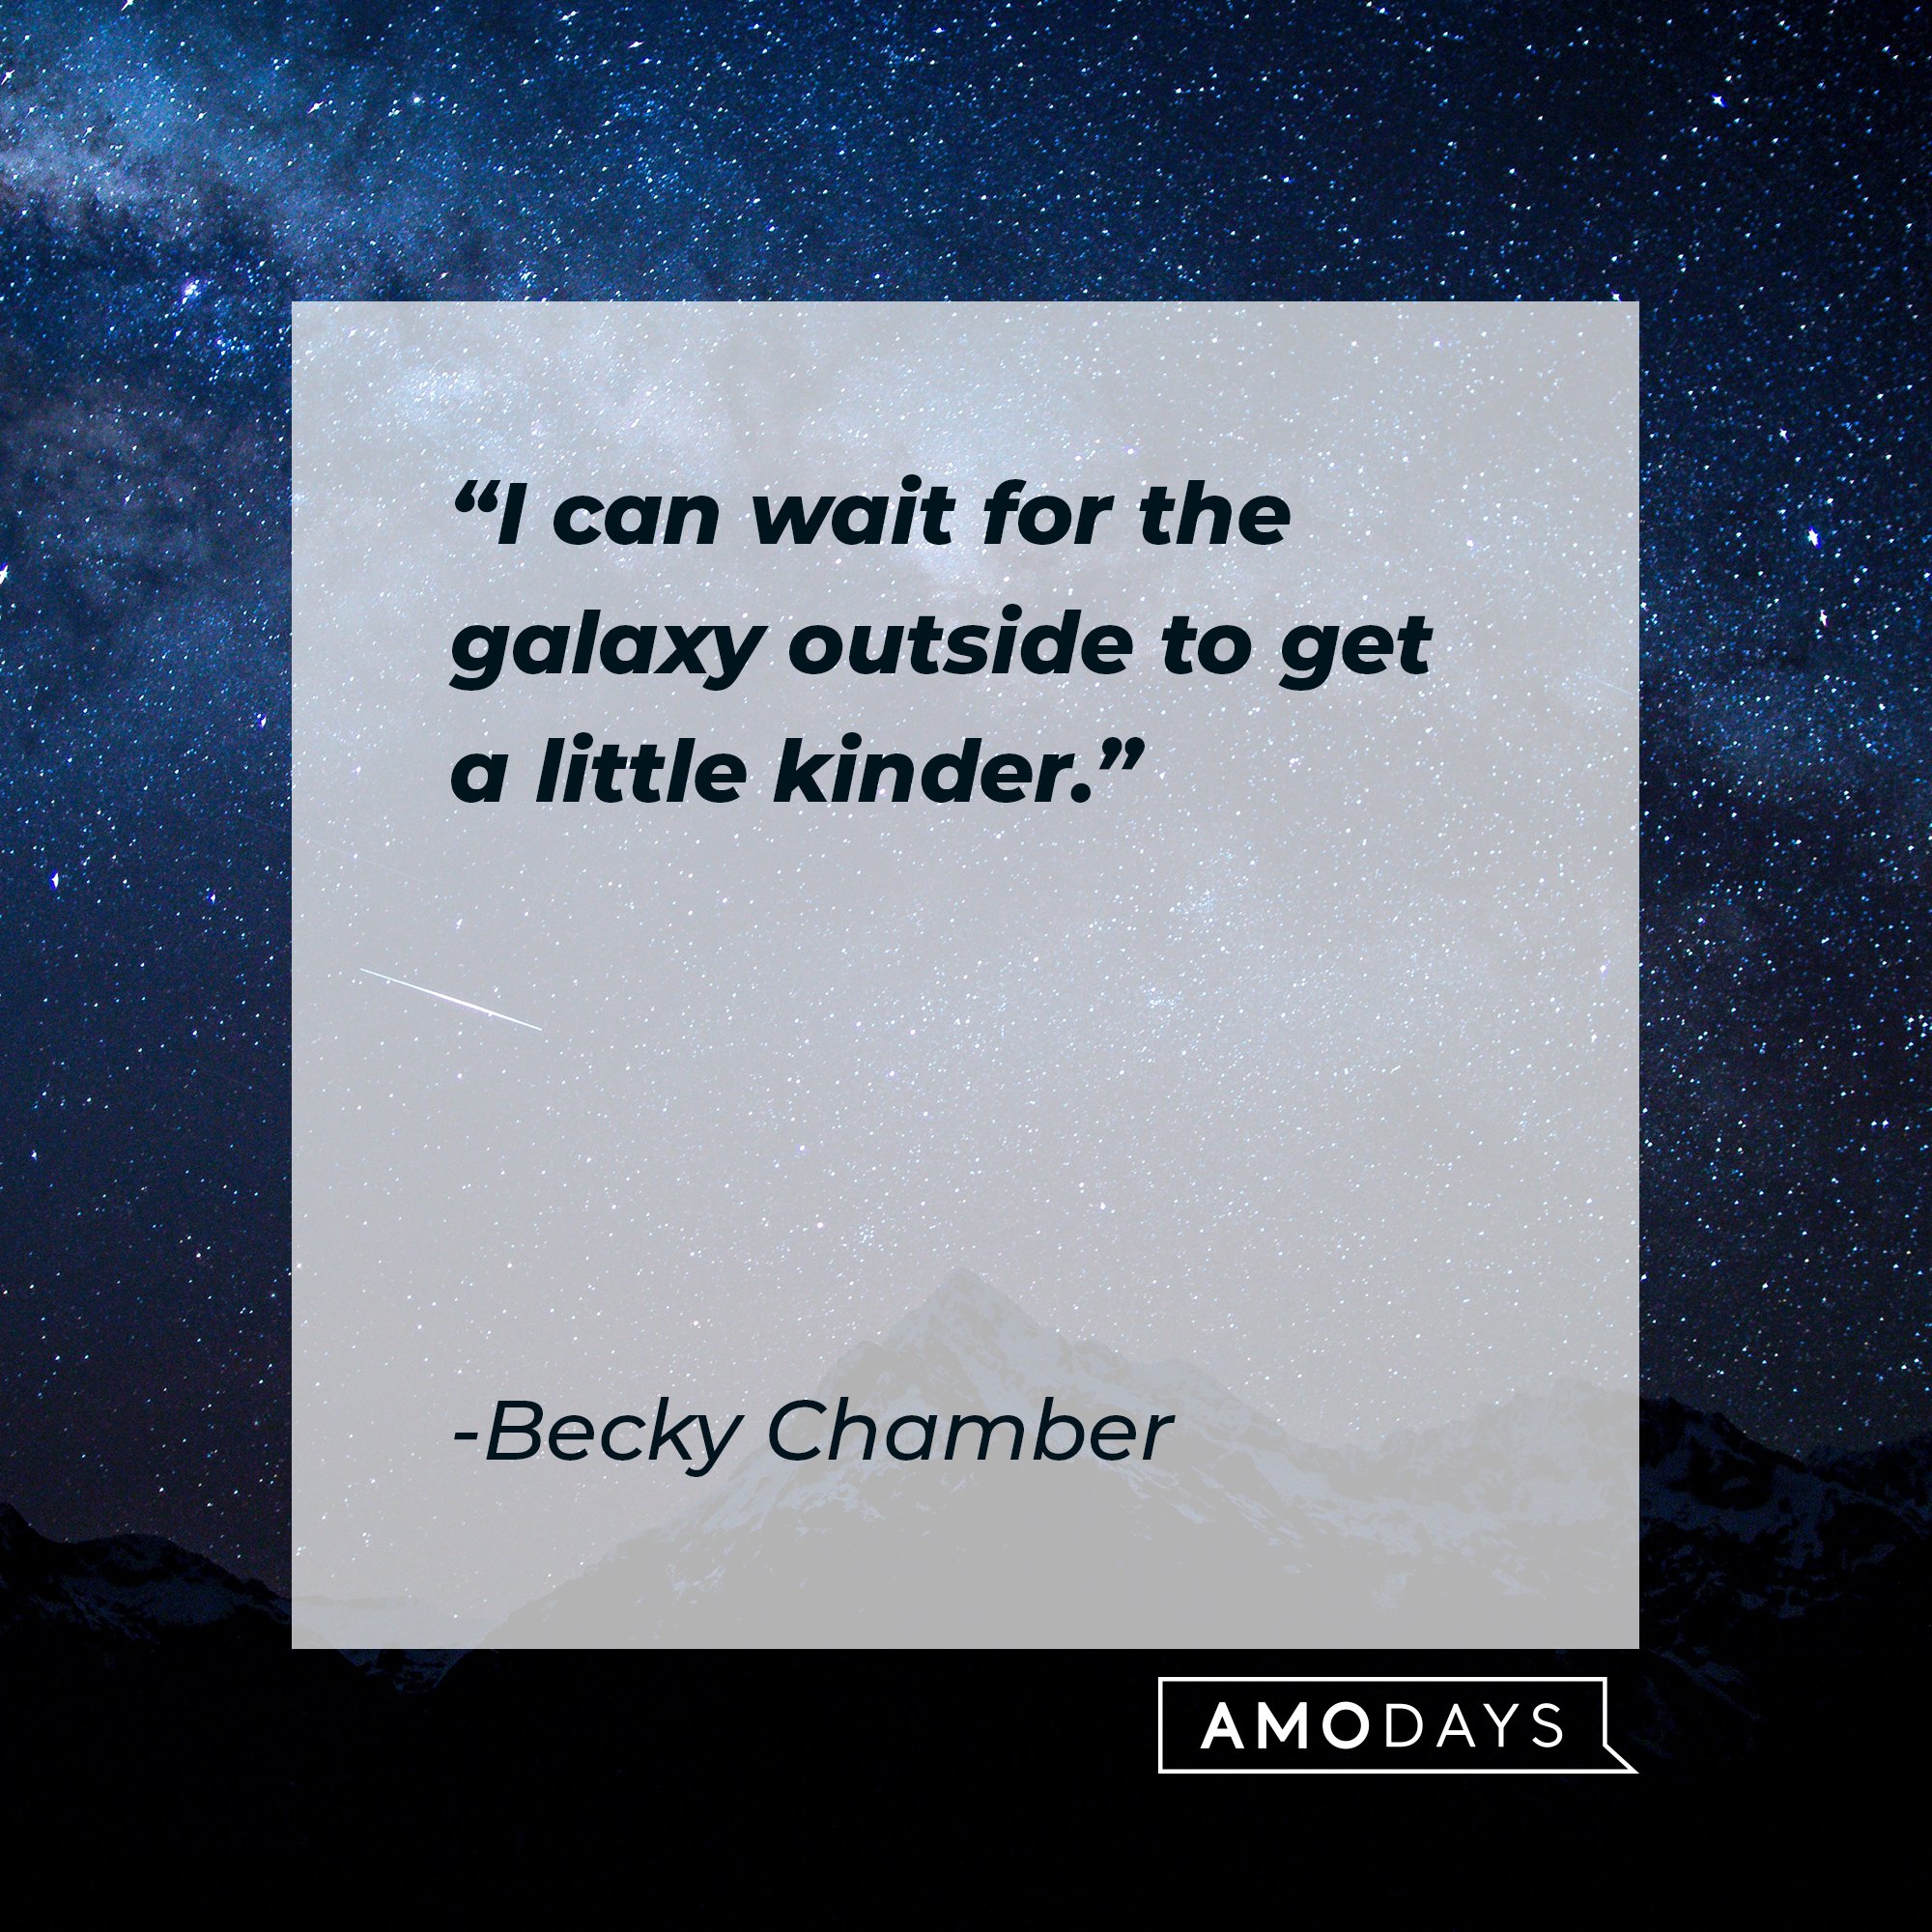 Becky Chamber’s quote: "I can wait for the galaxy outside to get a little kinder." | Image: AmoDays